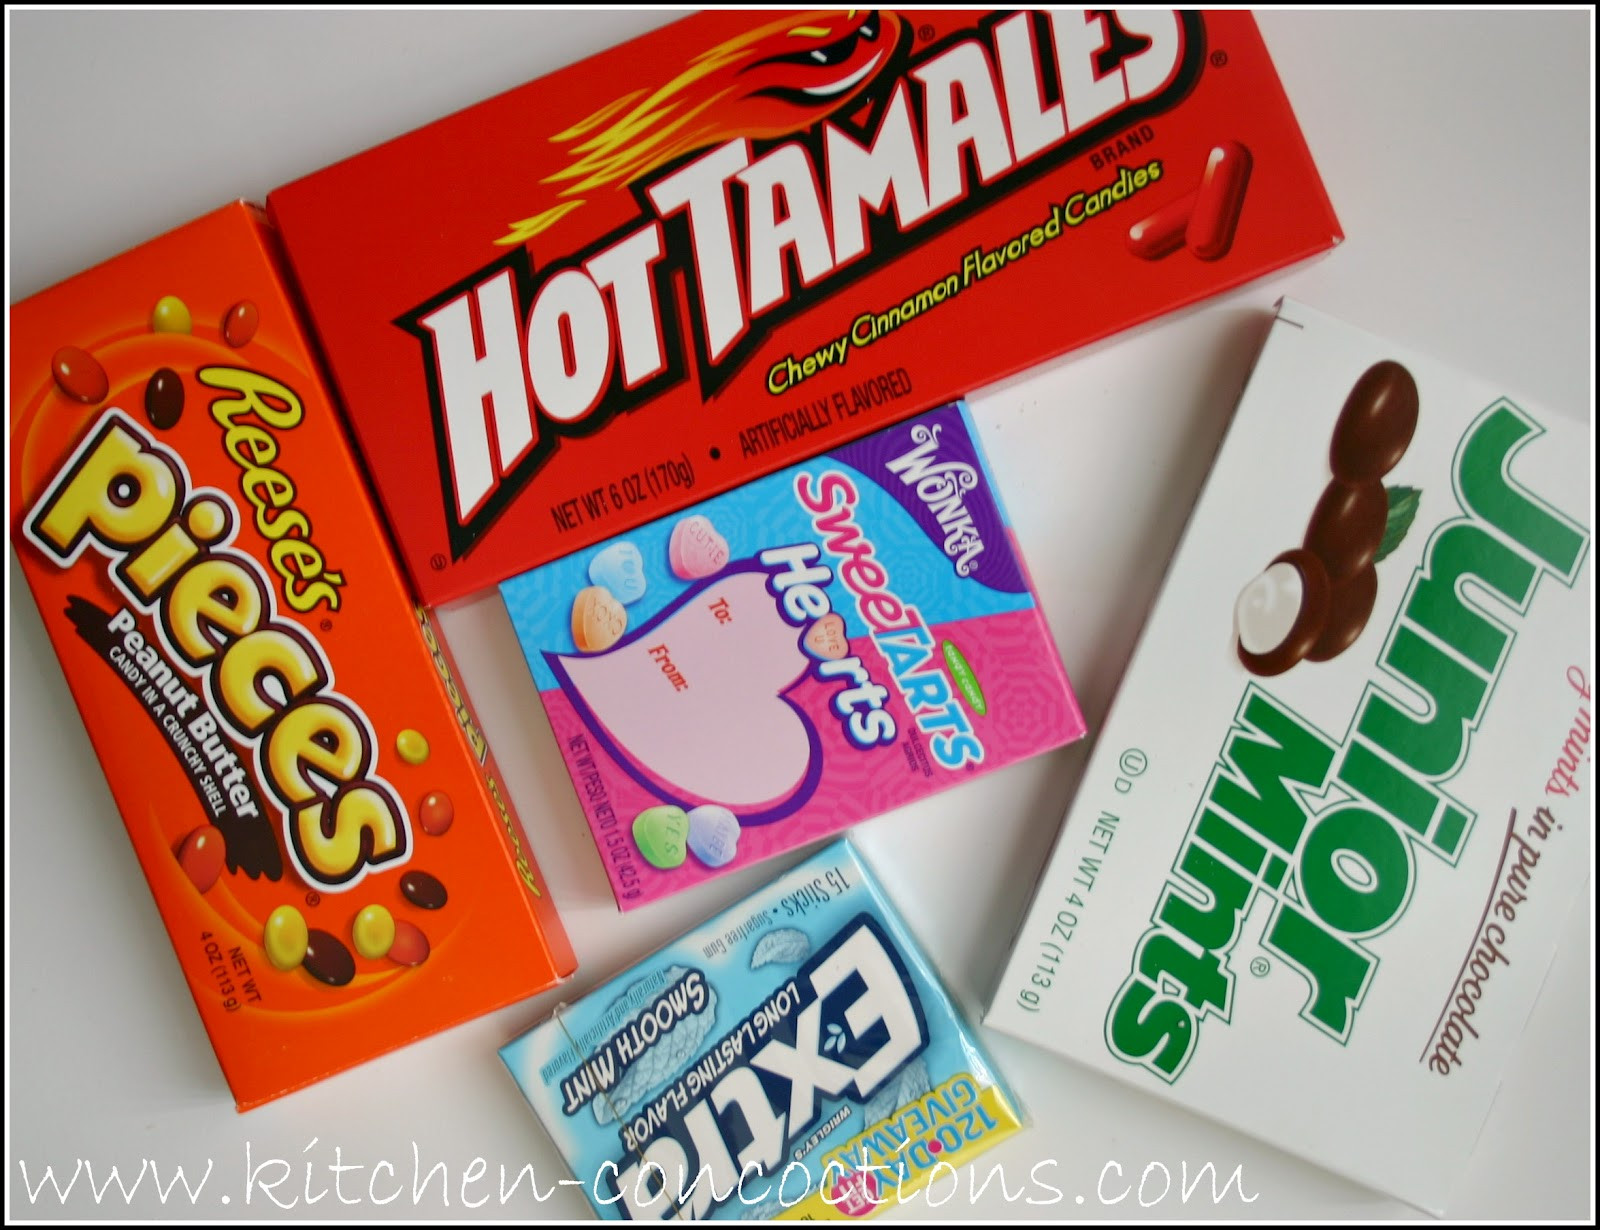 Candy Sayings For Valentines Day
 How To Valentine s Day Candy Cards Kitchen Concoctions